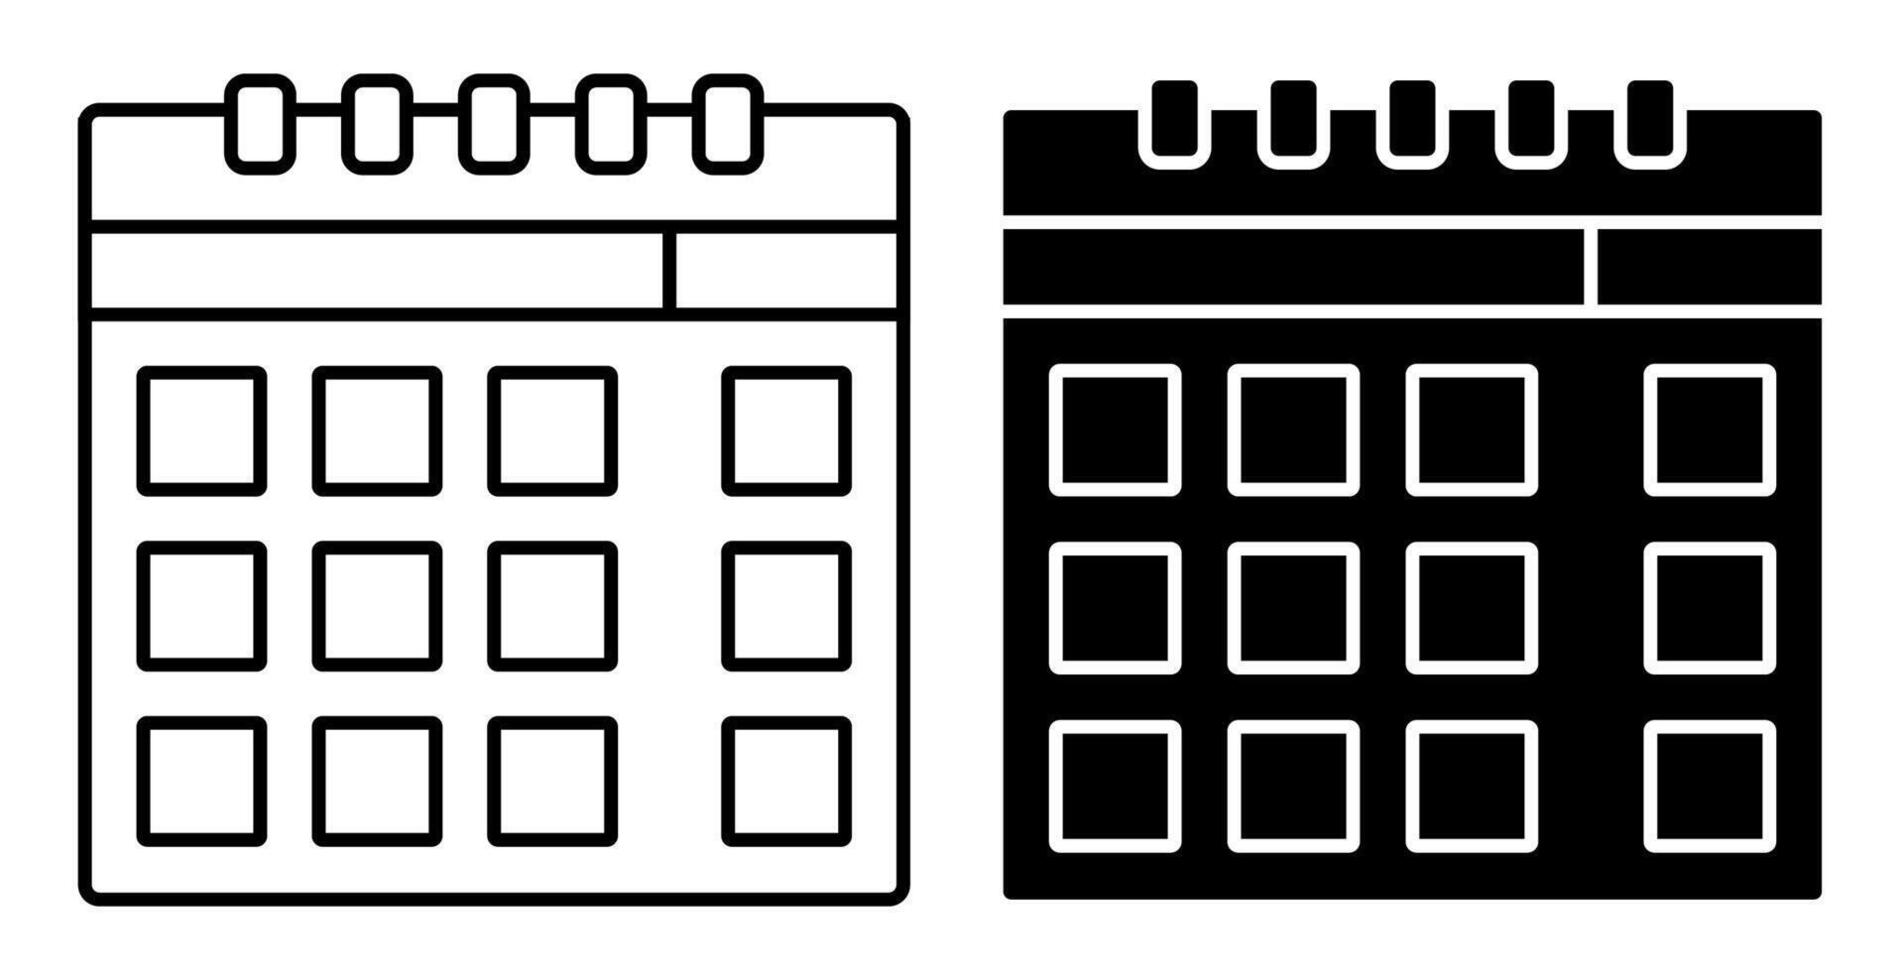 Paper wall calendar icon. Marking days of the week, months on calendar. Simple black and white vector